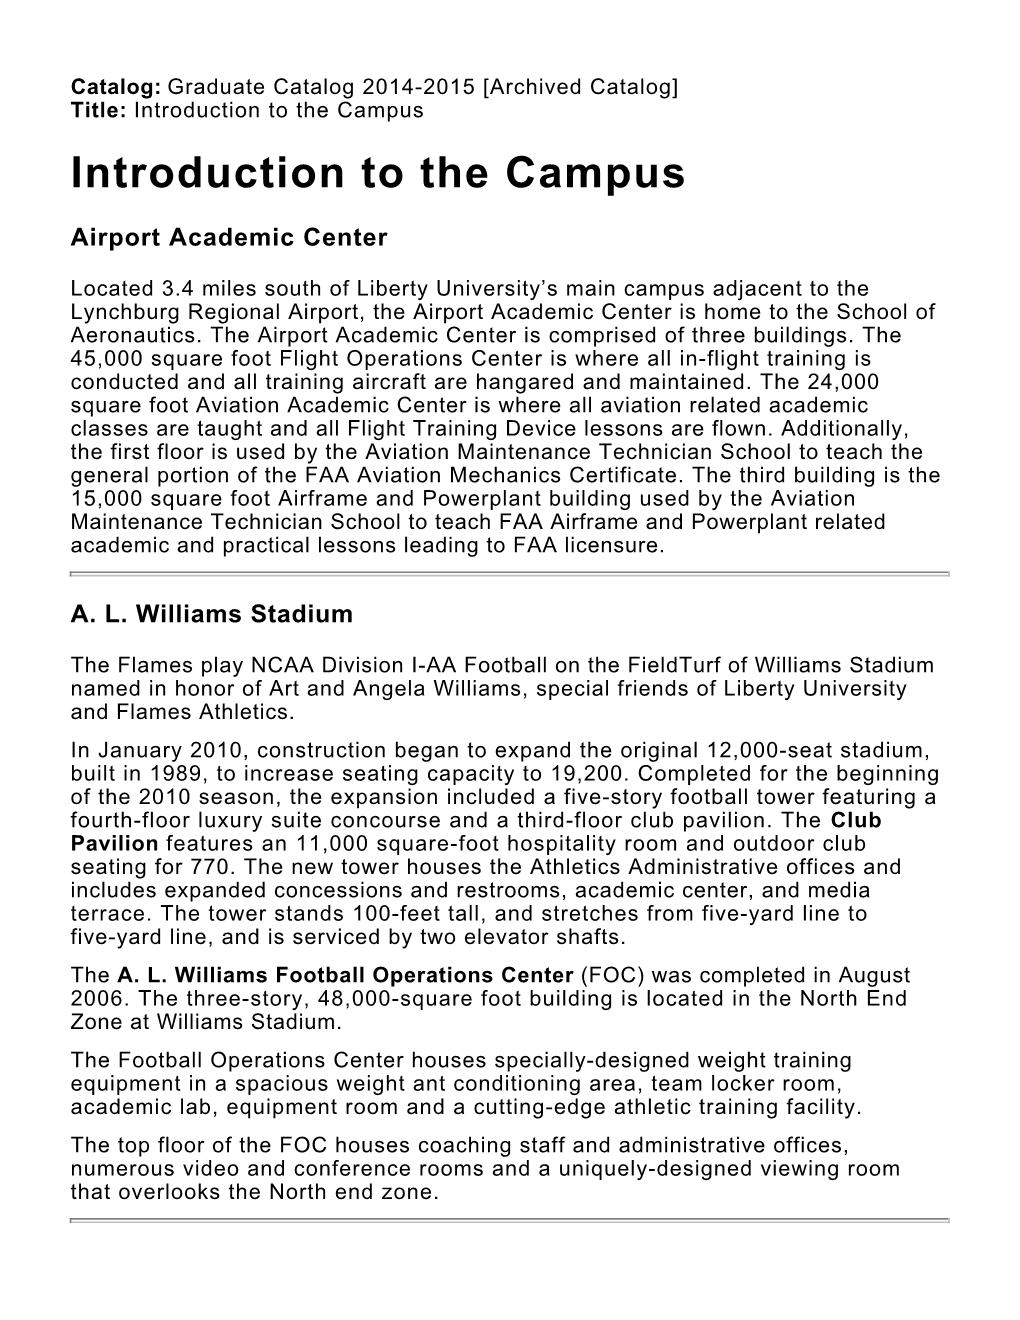 Introduction to the Campus Introduction to the Campus